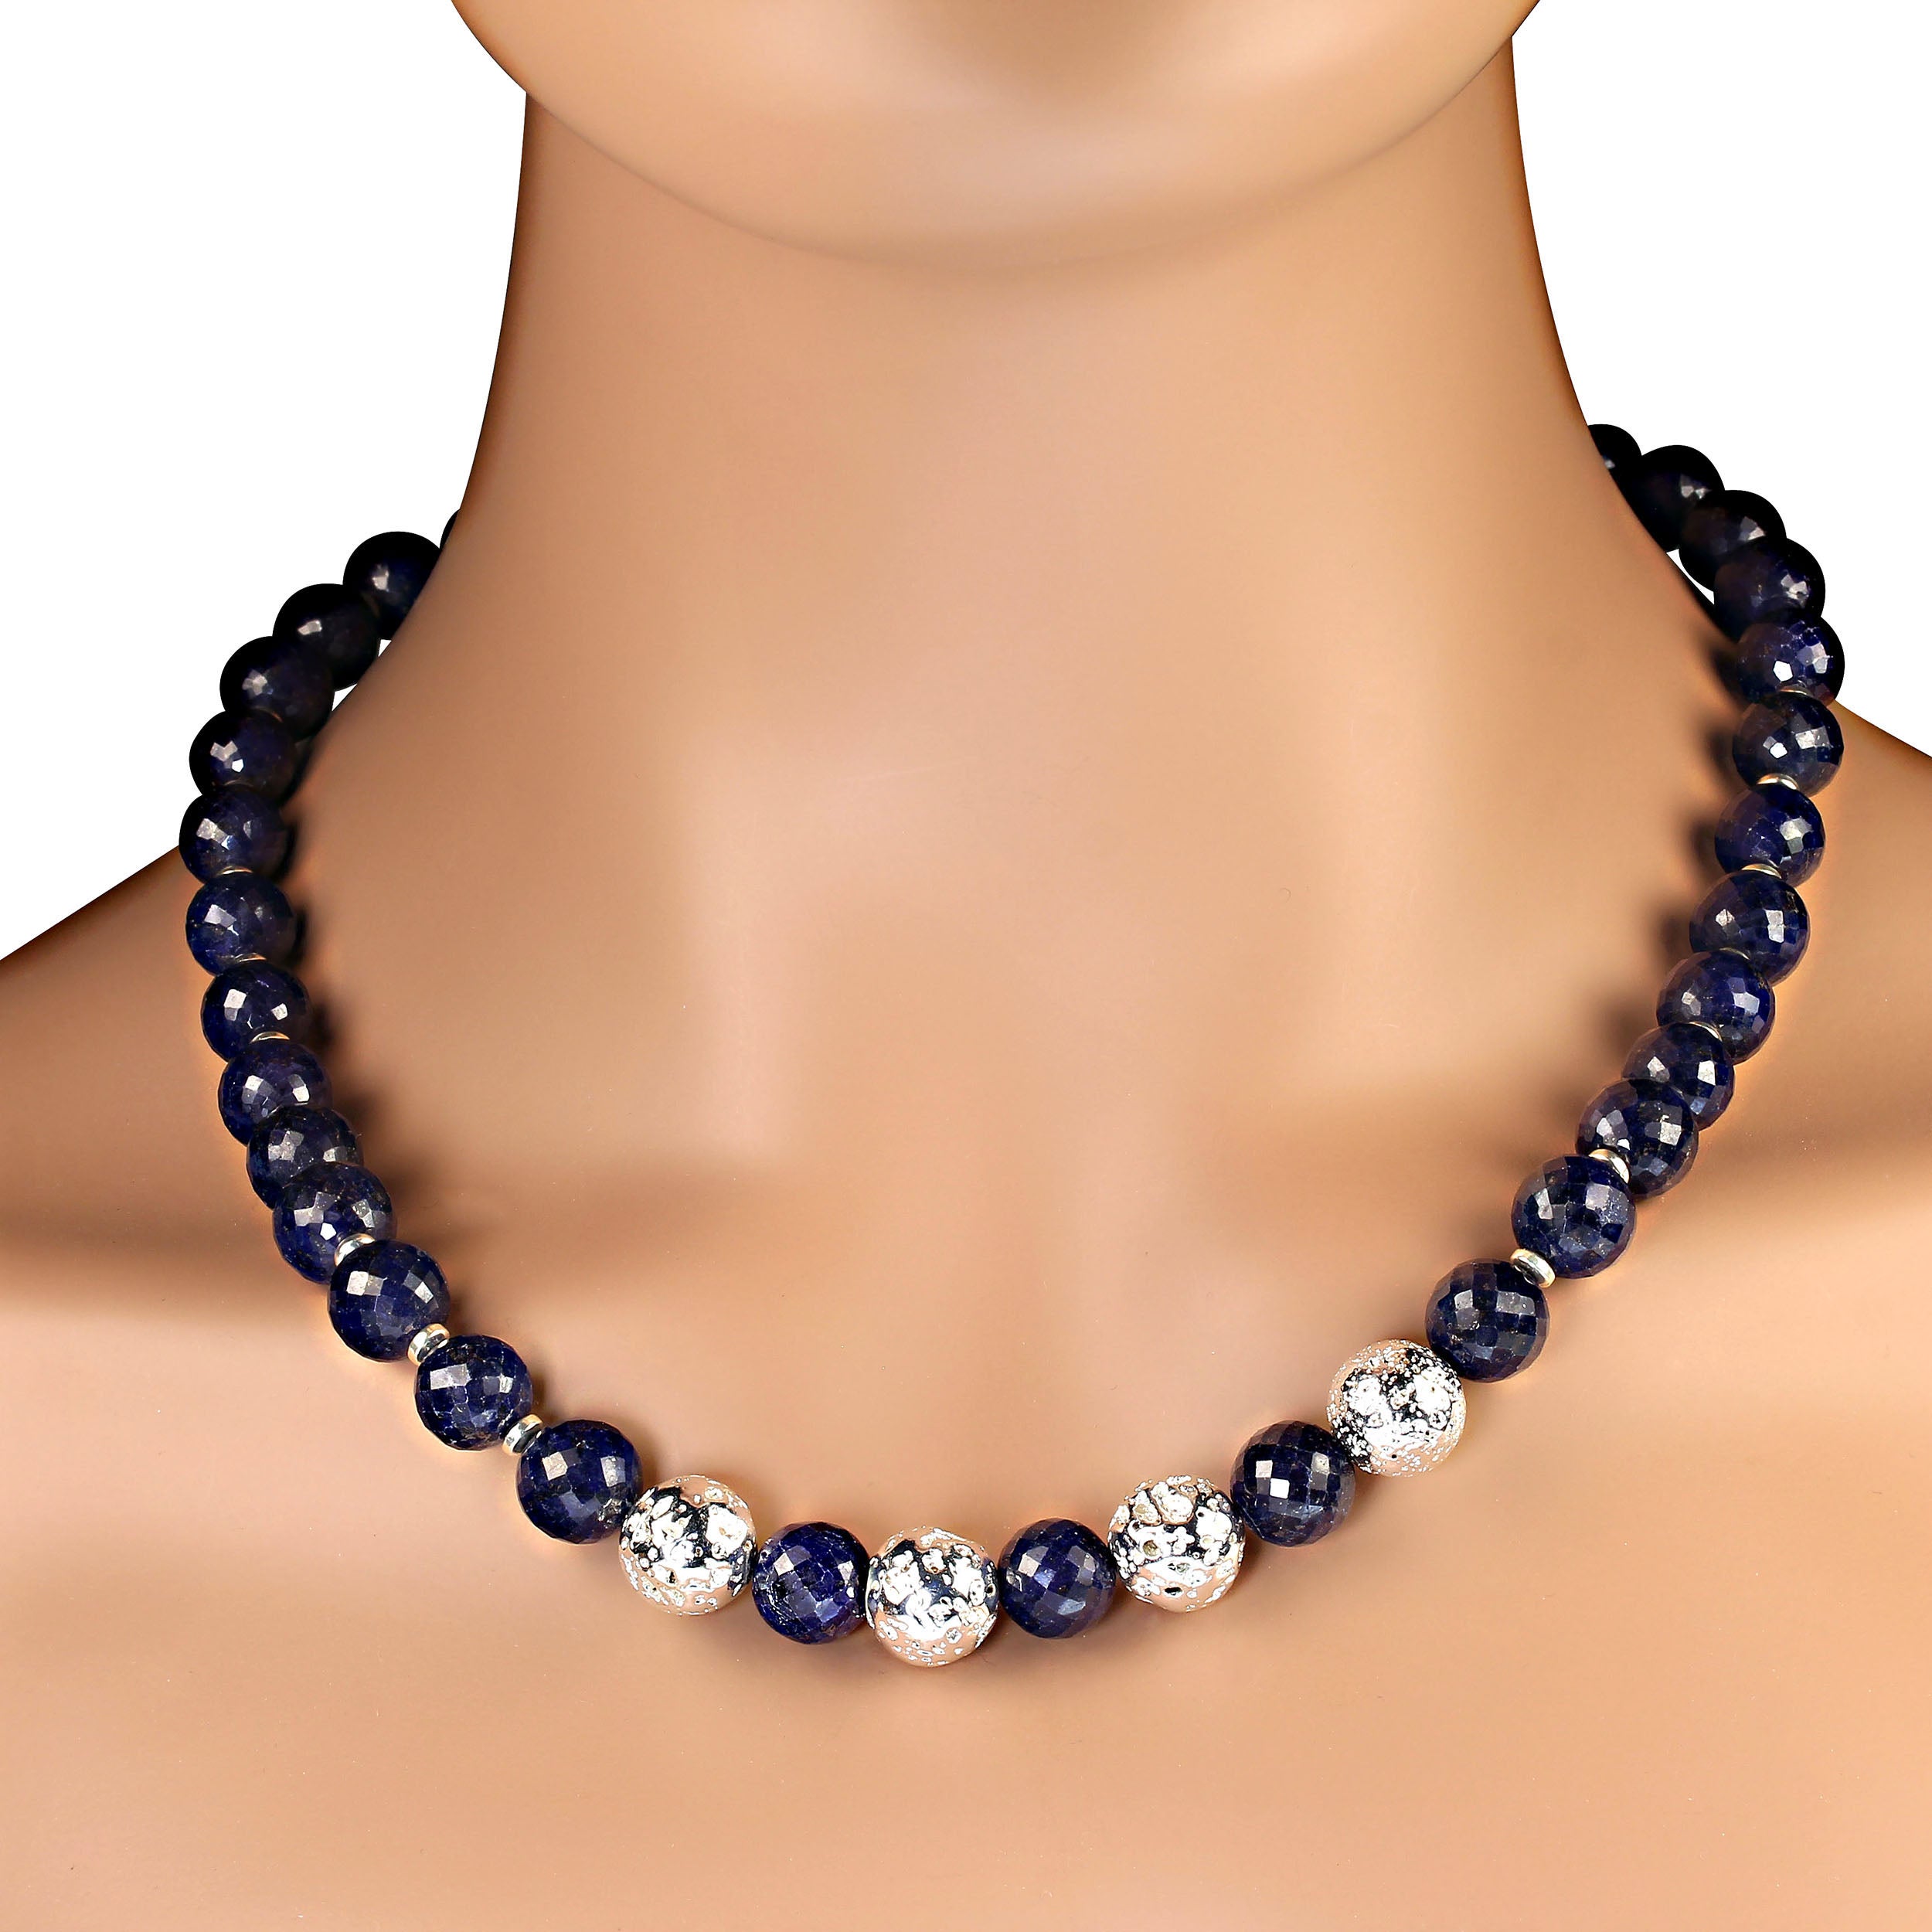 AJD Stunning 21 Inch Blue Sapphire necklace with Silver accents